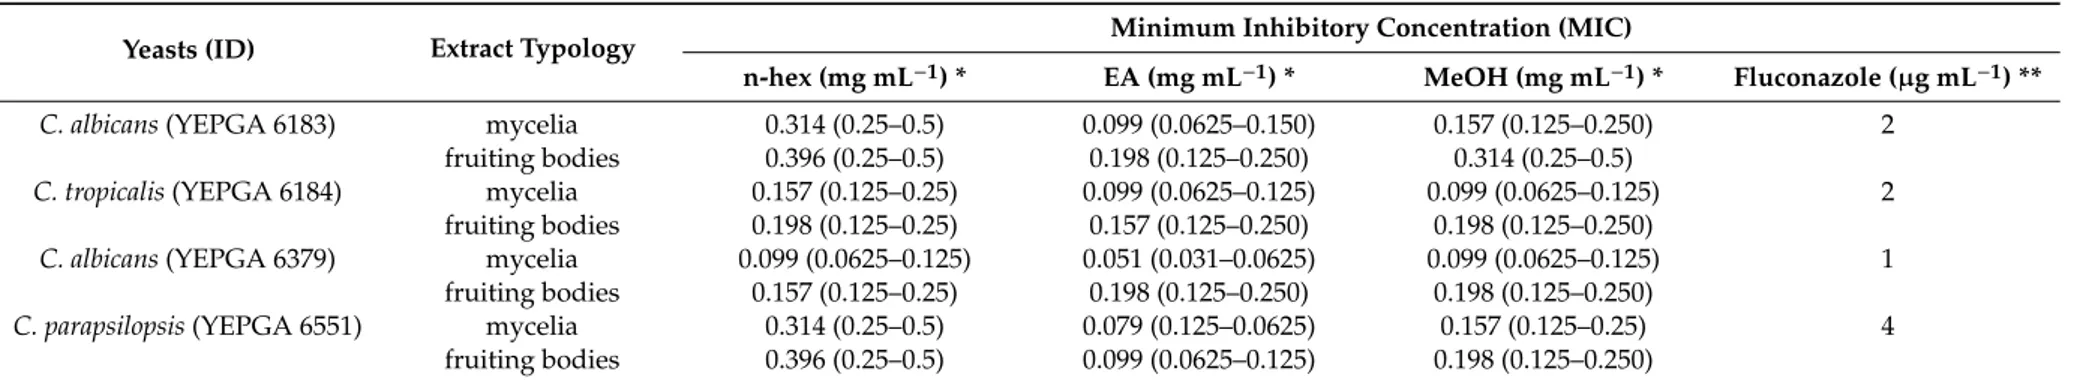 Table 5. Minimal inhibitory concentrations (MICs) of T. goniospermum n-hexane, ethyl acetate and methanol extracts, and fluconazole towards selected yeasts.